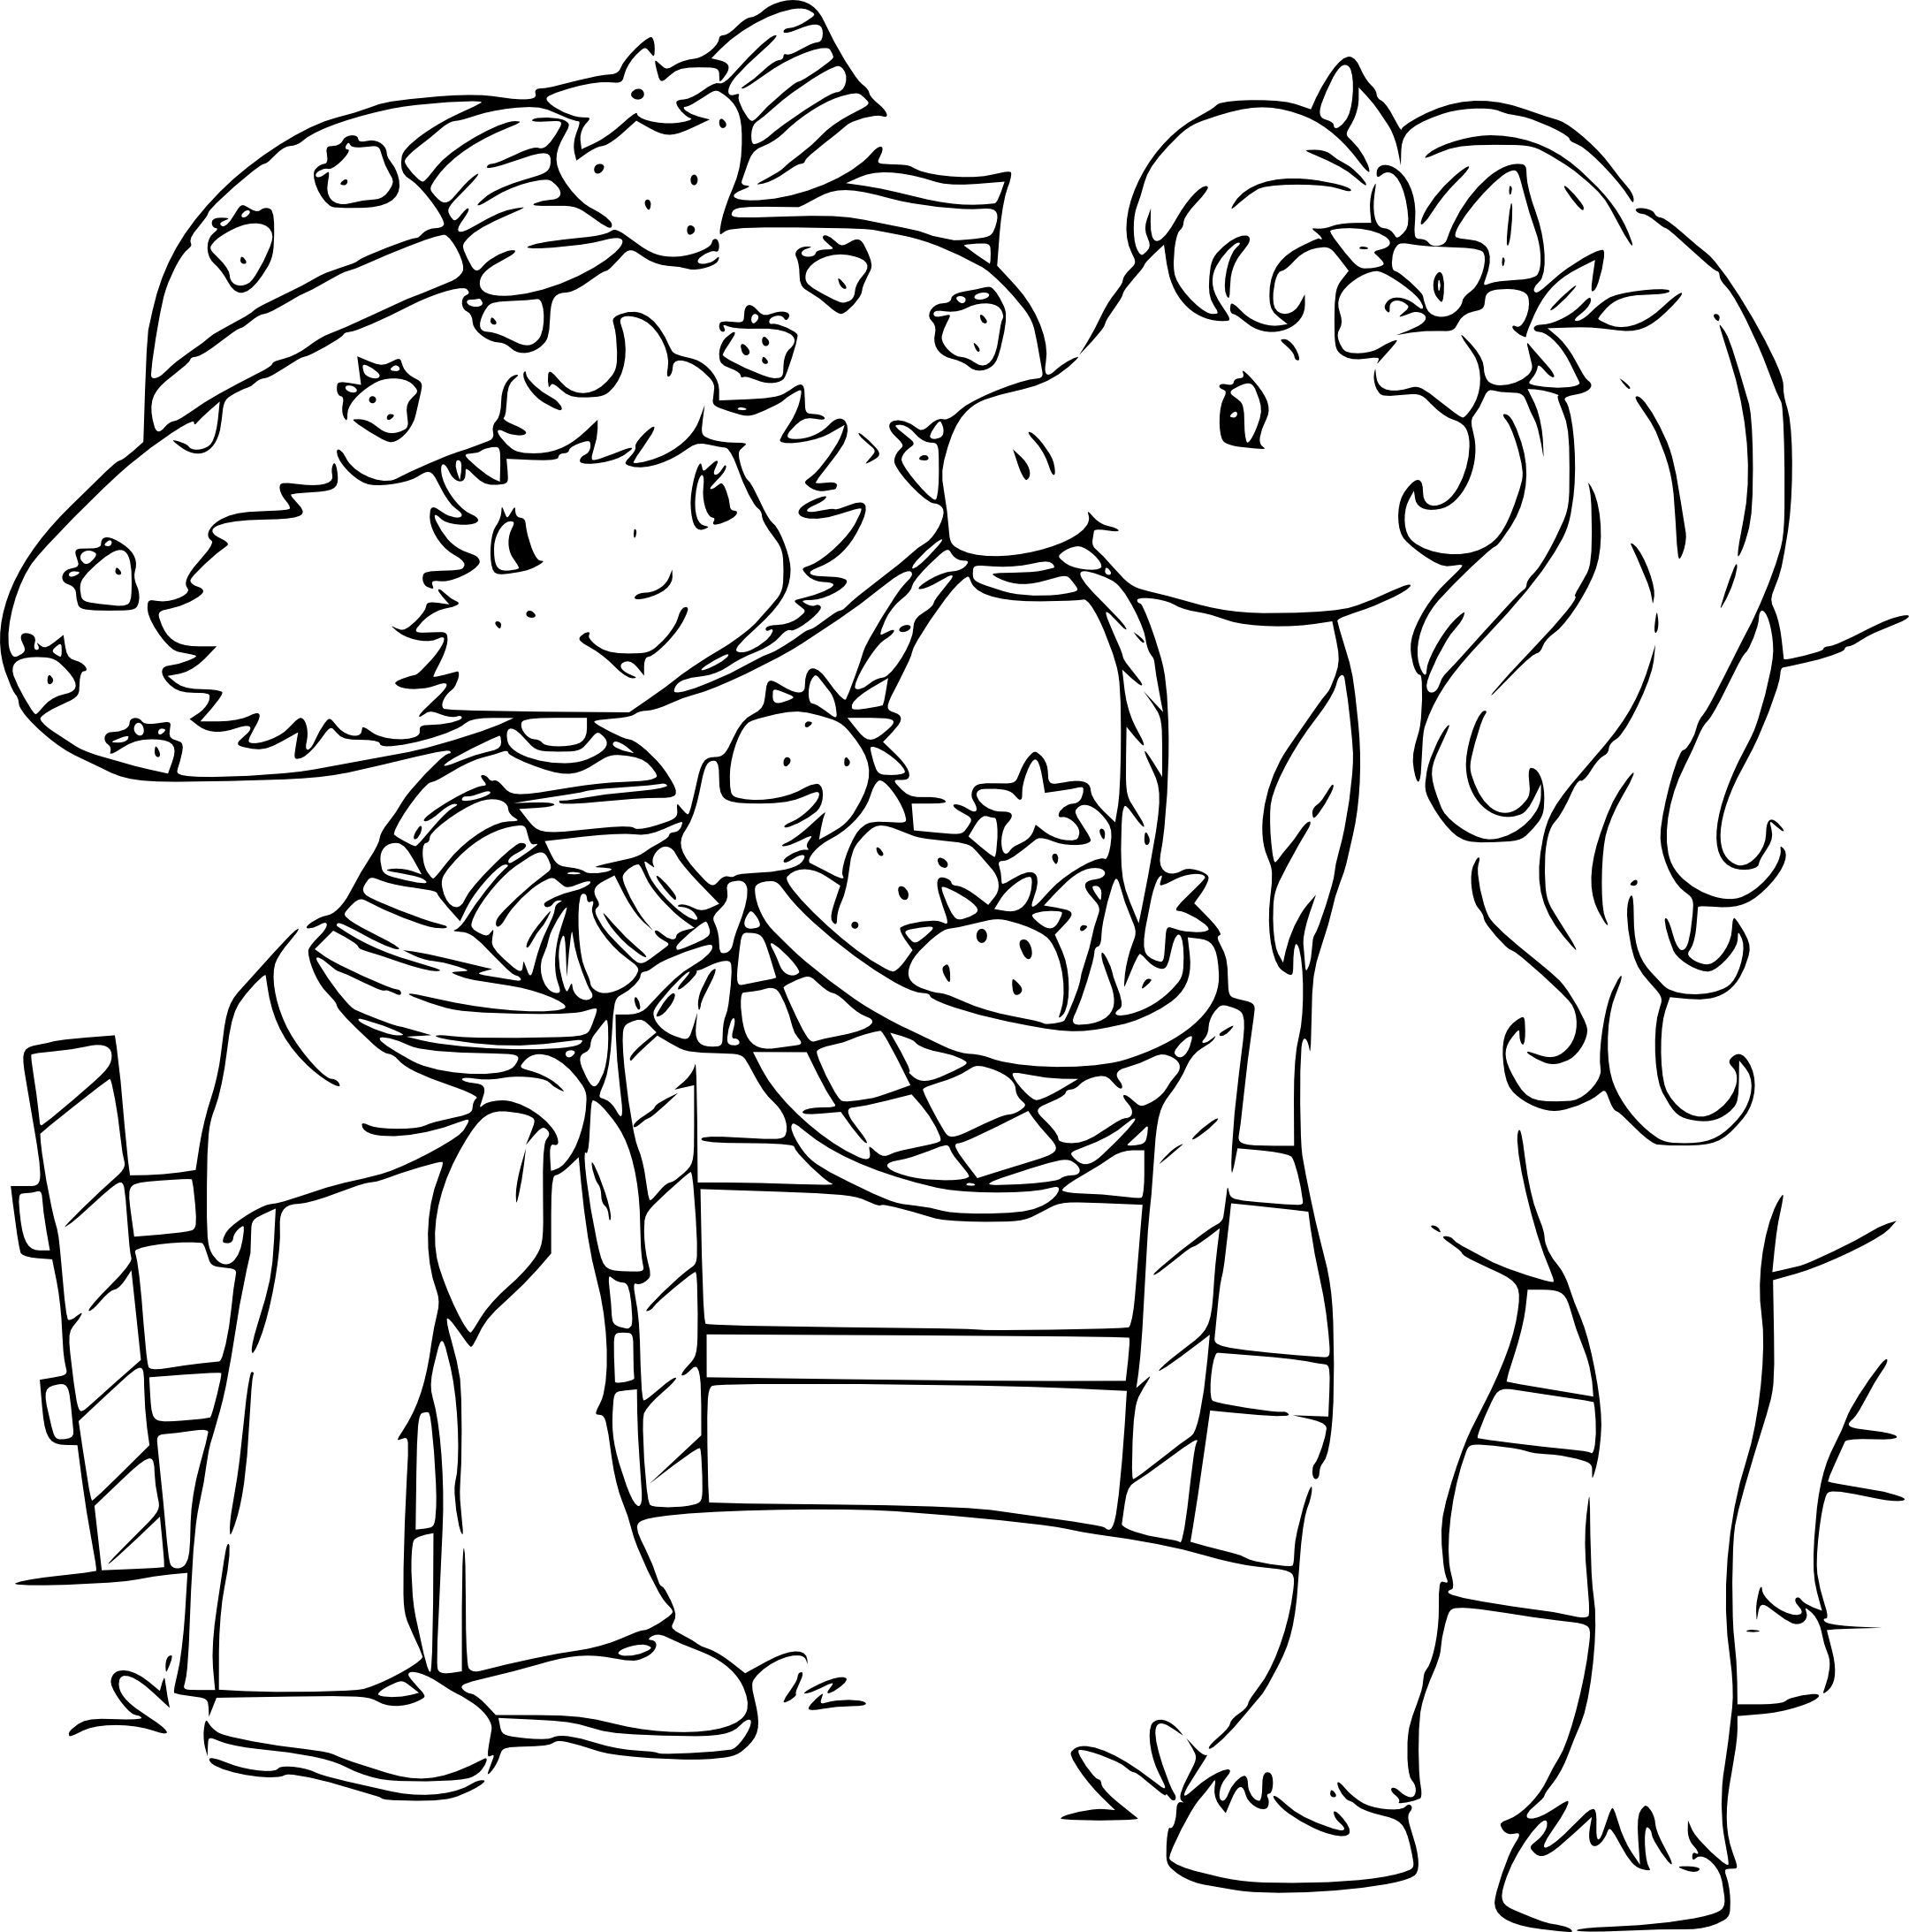 Strawberry Shortcake And Its Horse coloring page